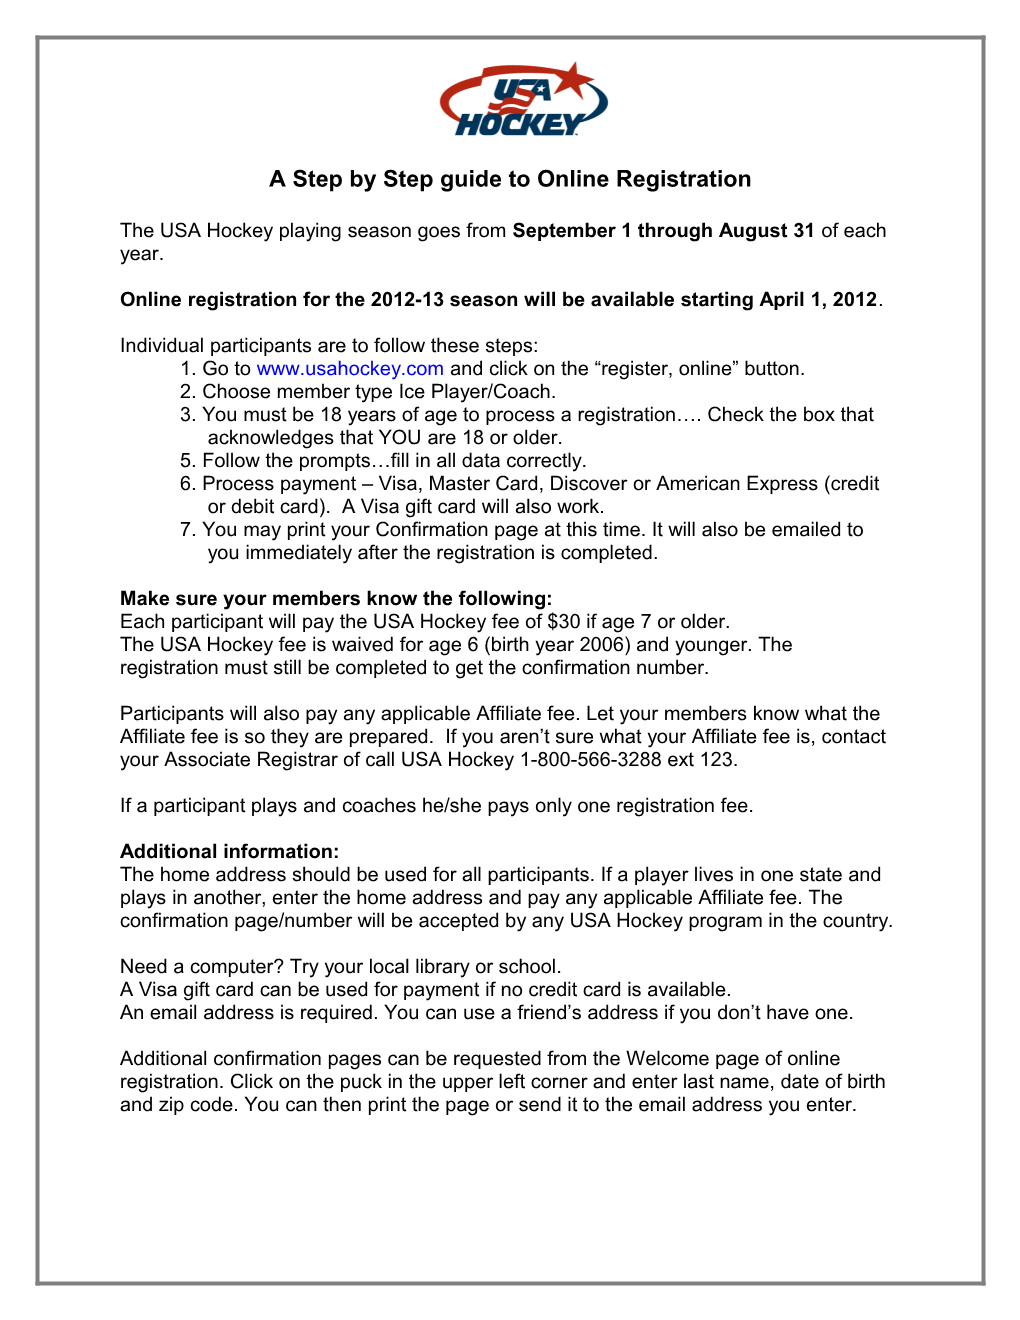 A Step by Step Guide to Online Registration